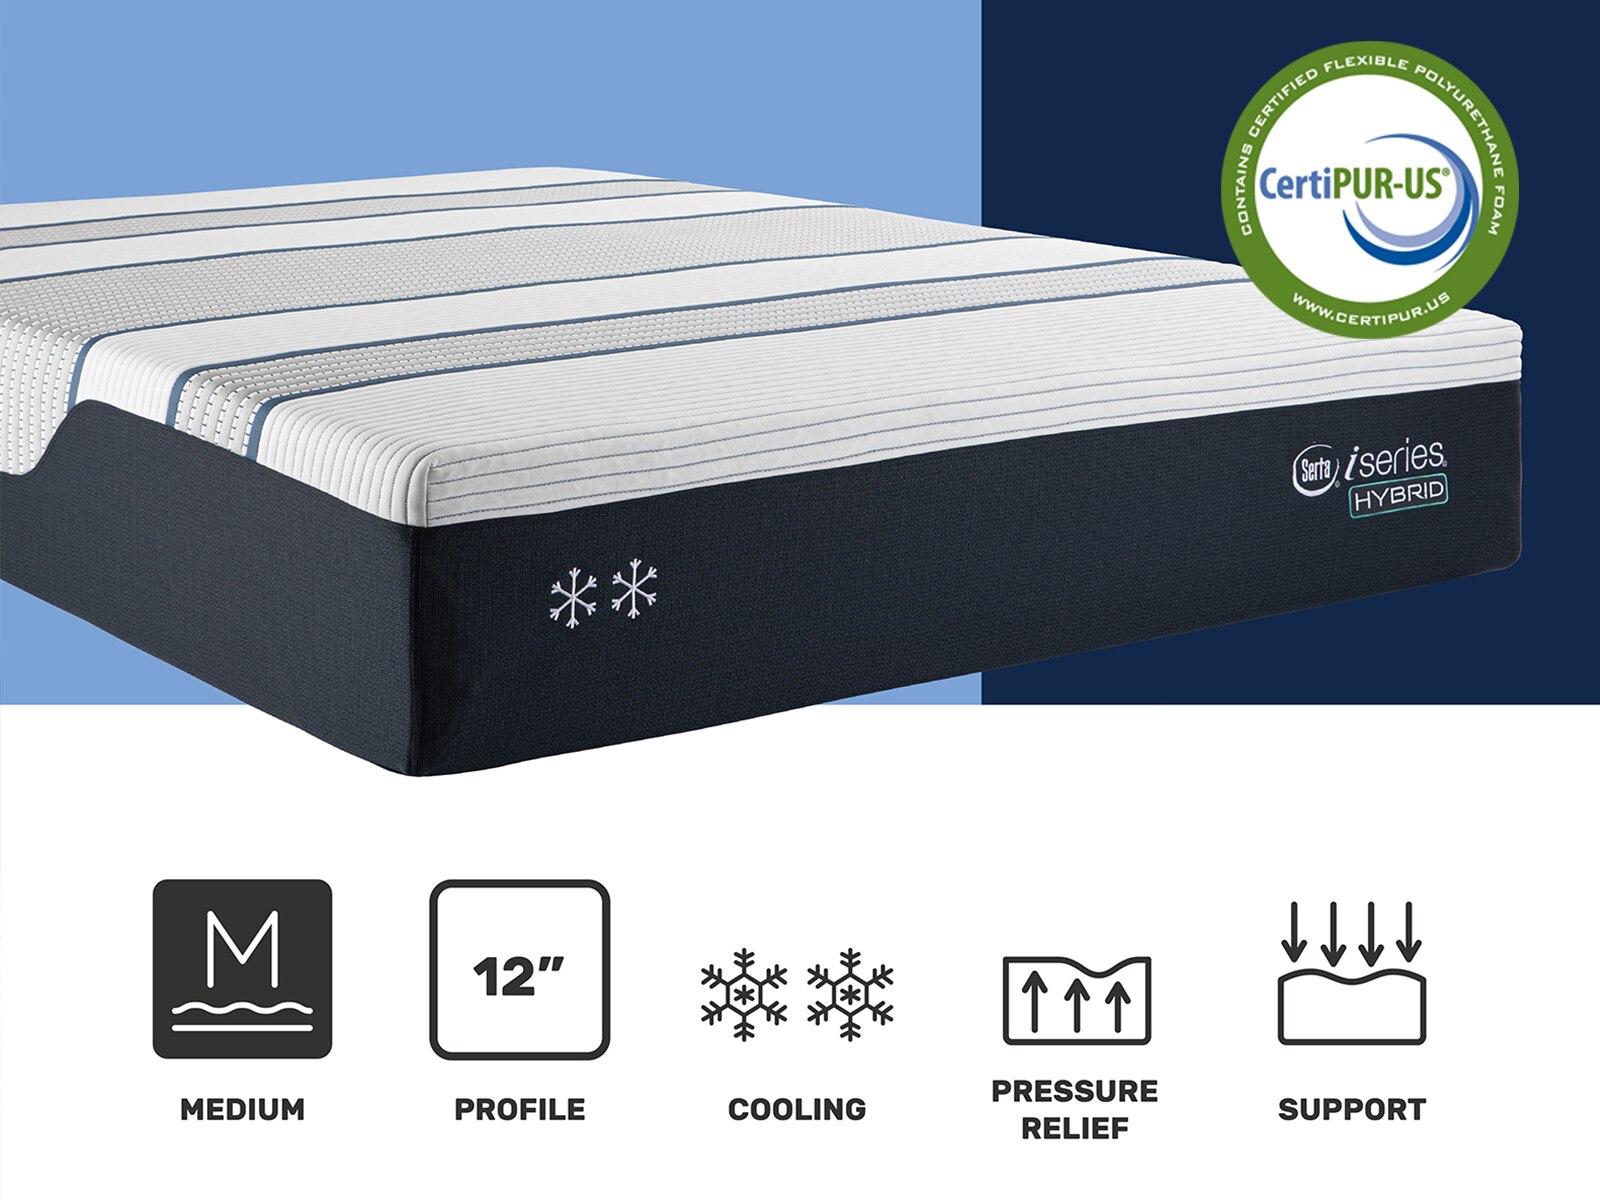 iseries approval mattress reviews